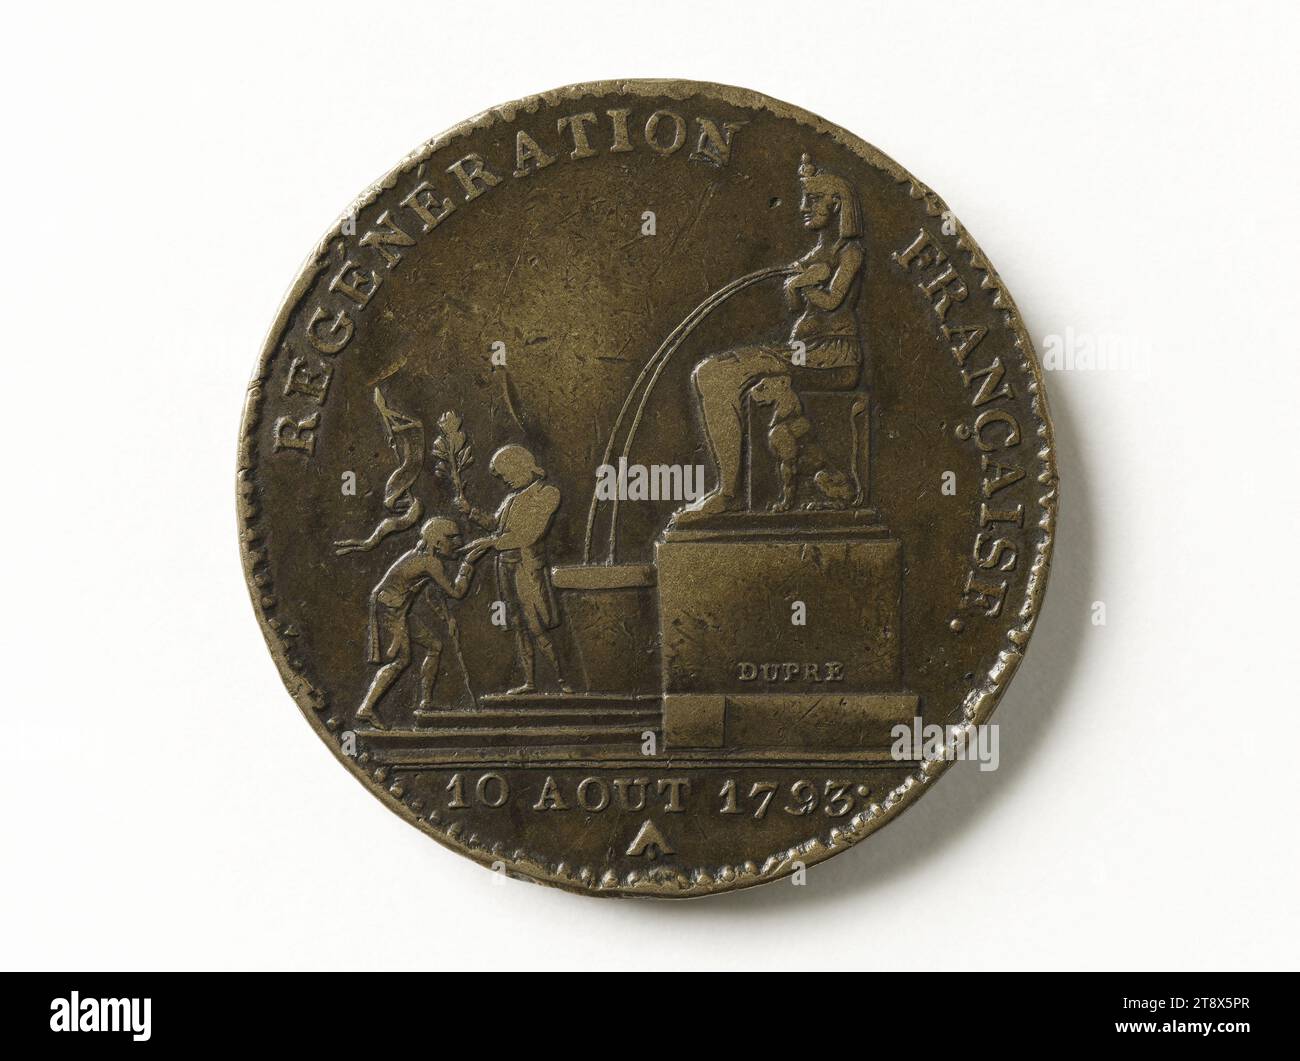 Coin of five decimes 'French Regeneration', 1793, Dupré, Augustin or Auguste, Engraver in medals, Array, Numismatics, Currency, Paris, Dimensions - Work: Diameter: 3.54 cm, Weight (type dimension): 24.84 g Stock Photo